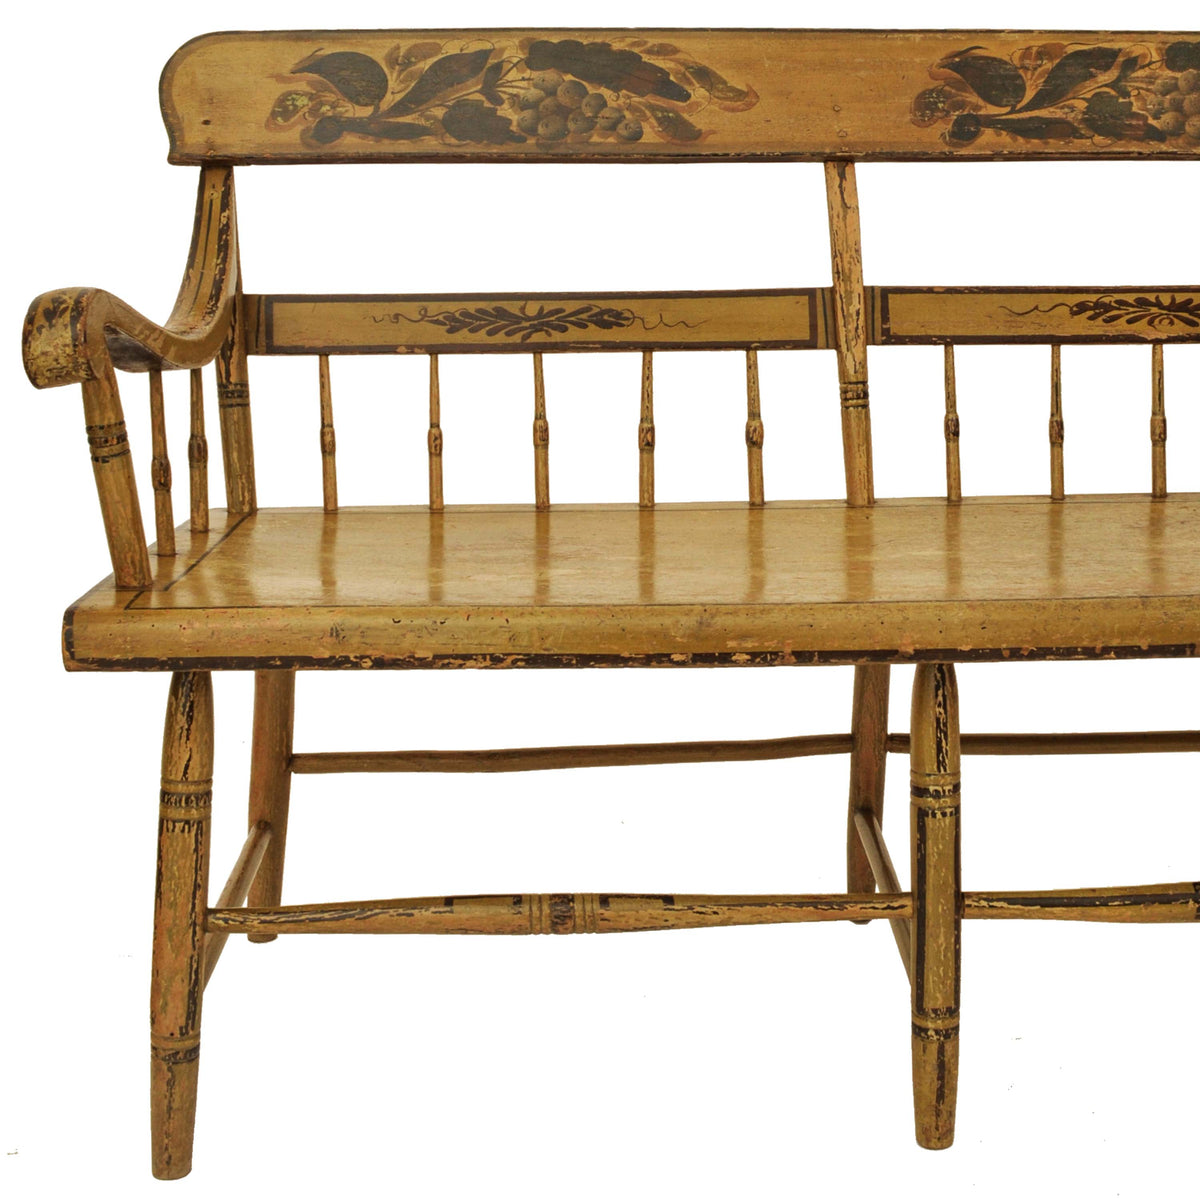 Antique American Colonial Federal Baltimore Painted Spindled Windsor Bench, circa 1820